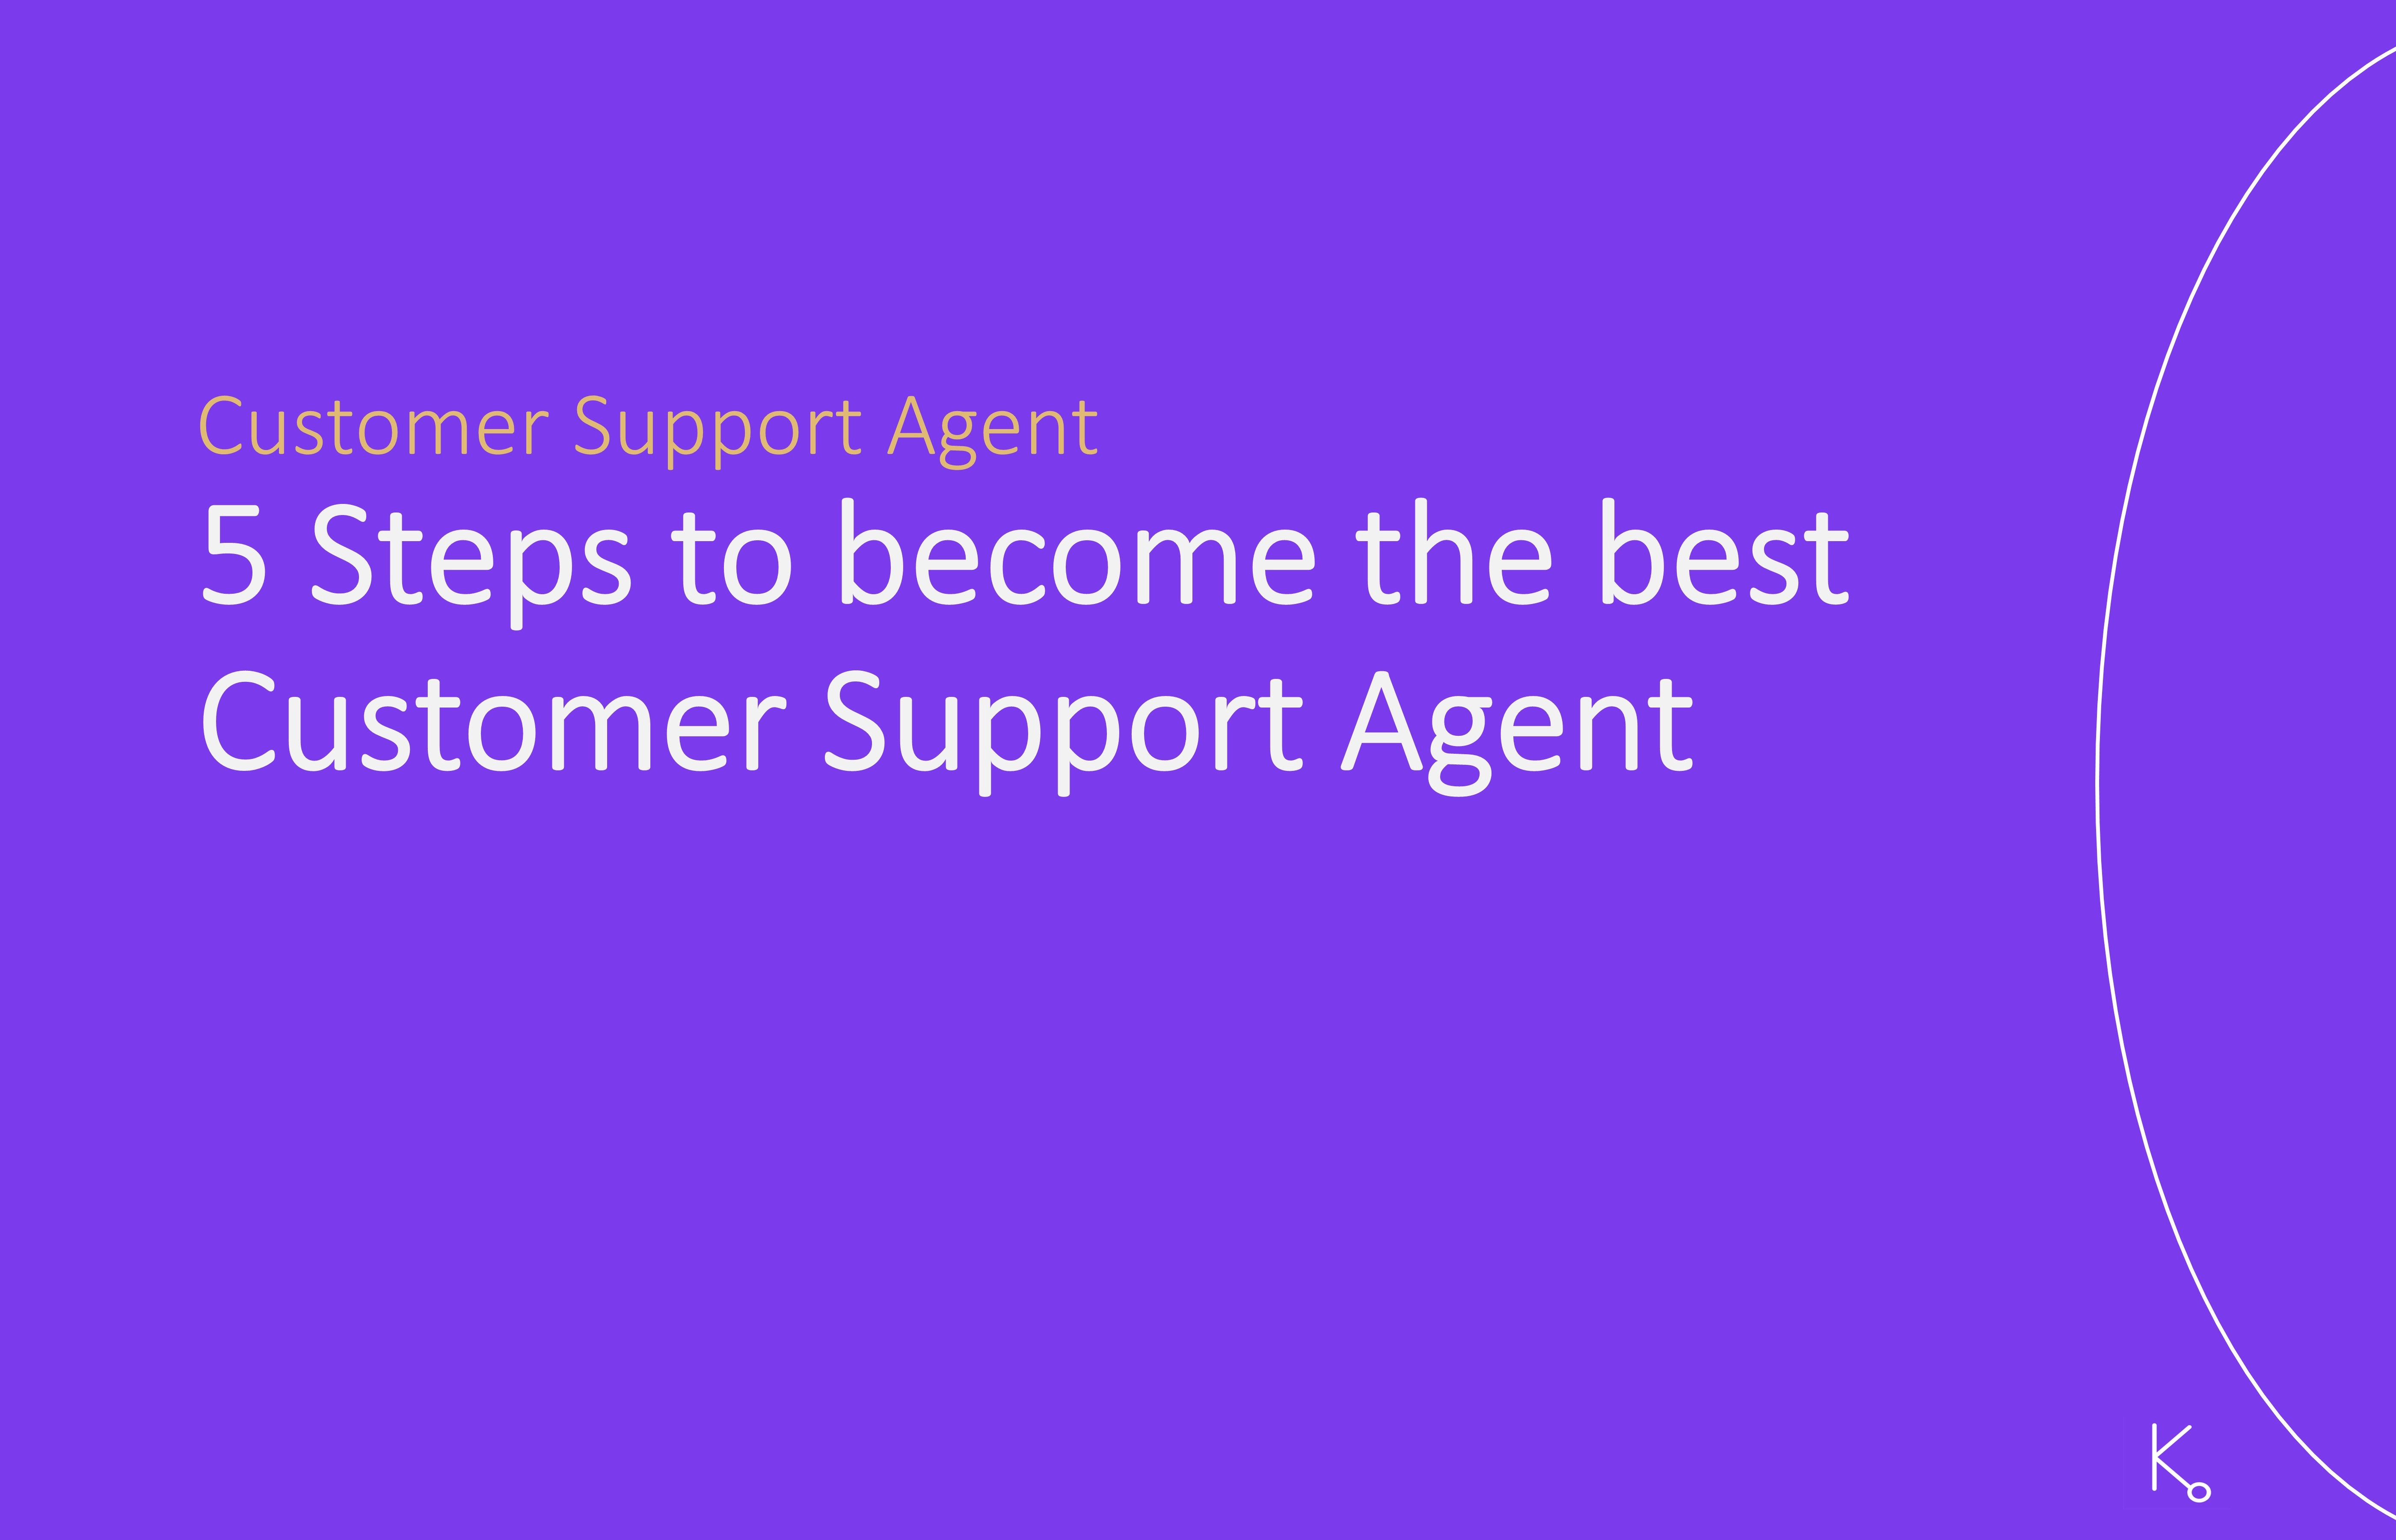 How to become the best Customer Support Agent in Five Steps